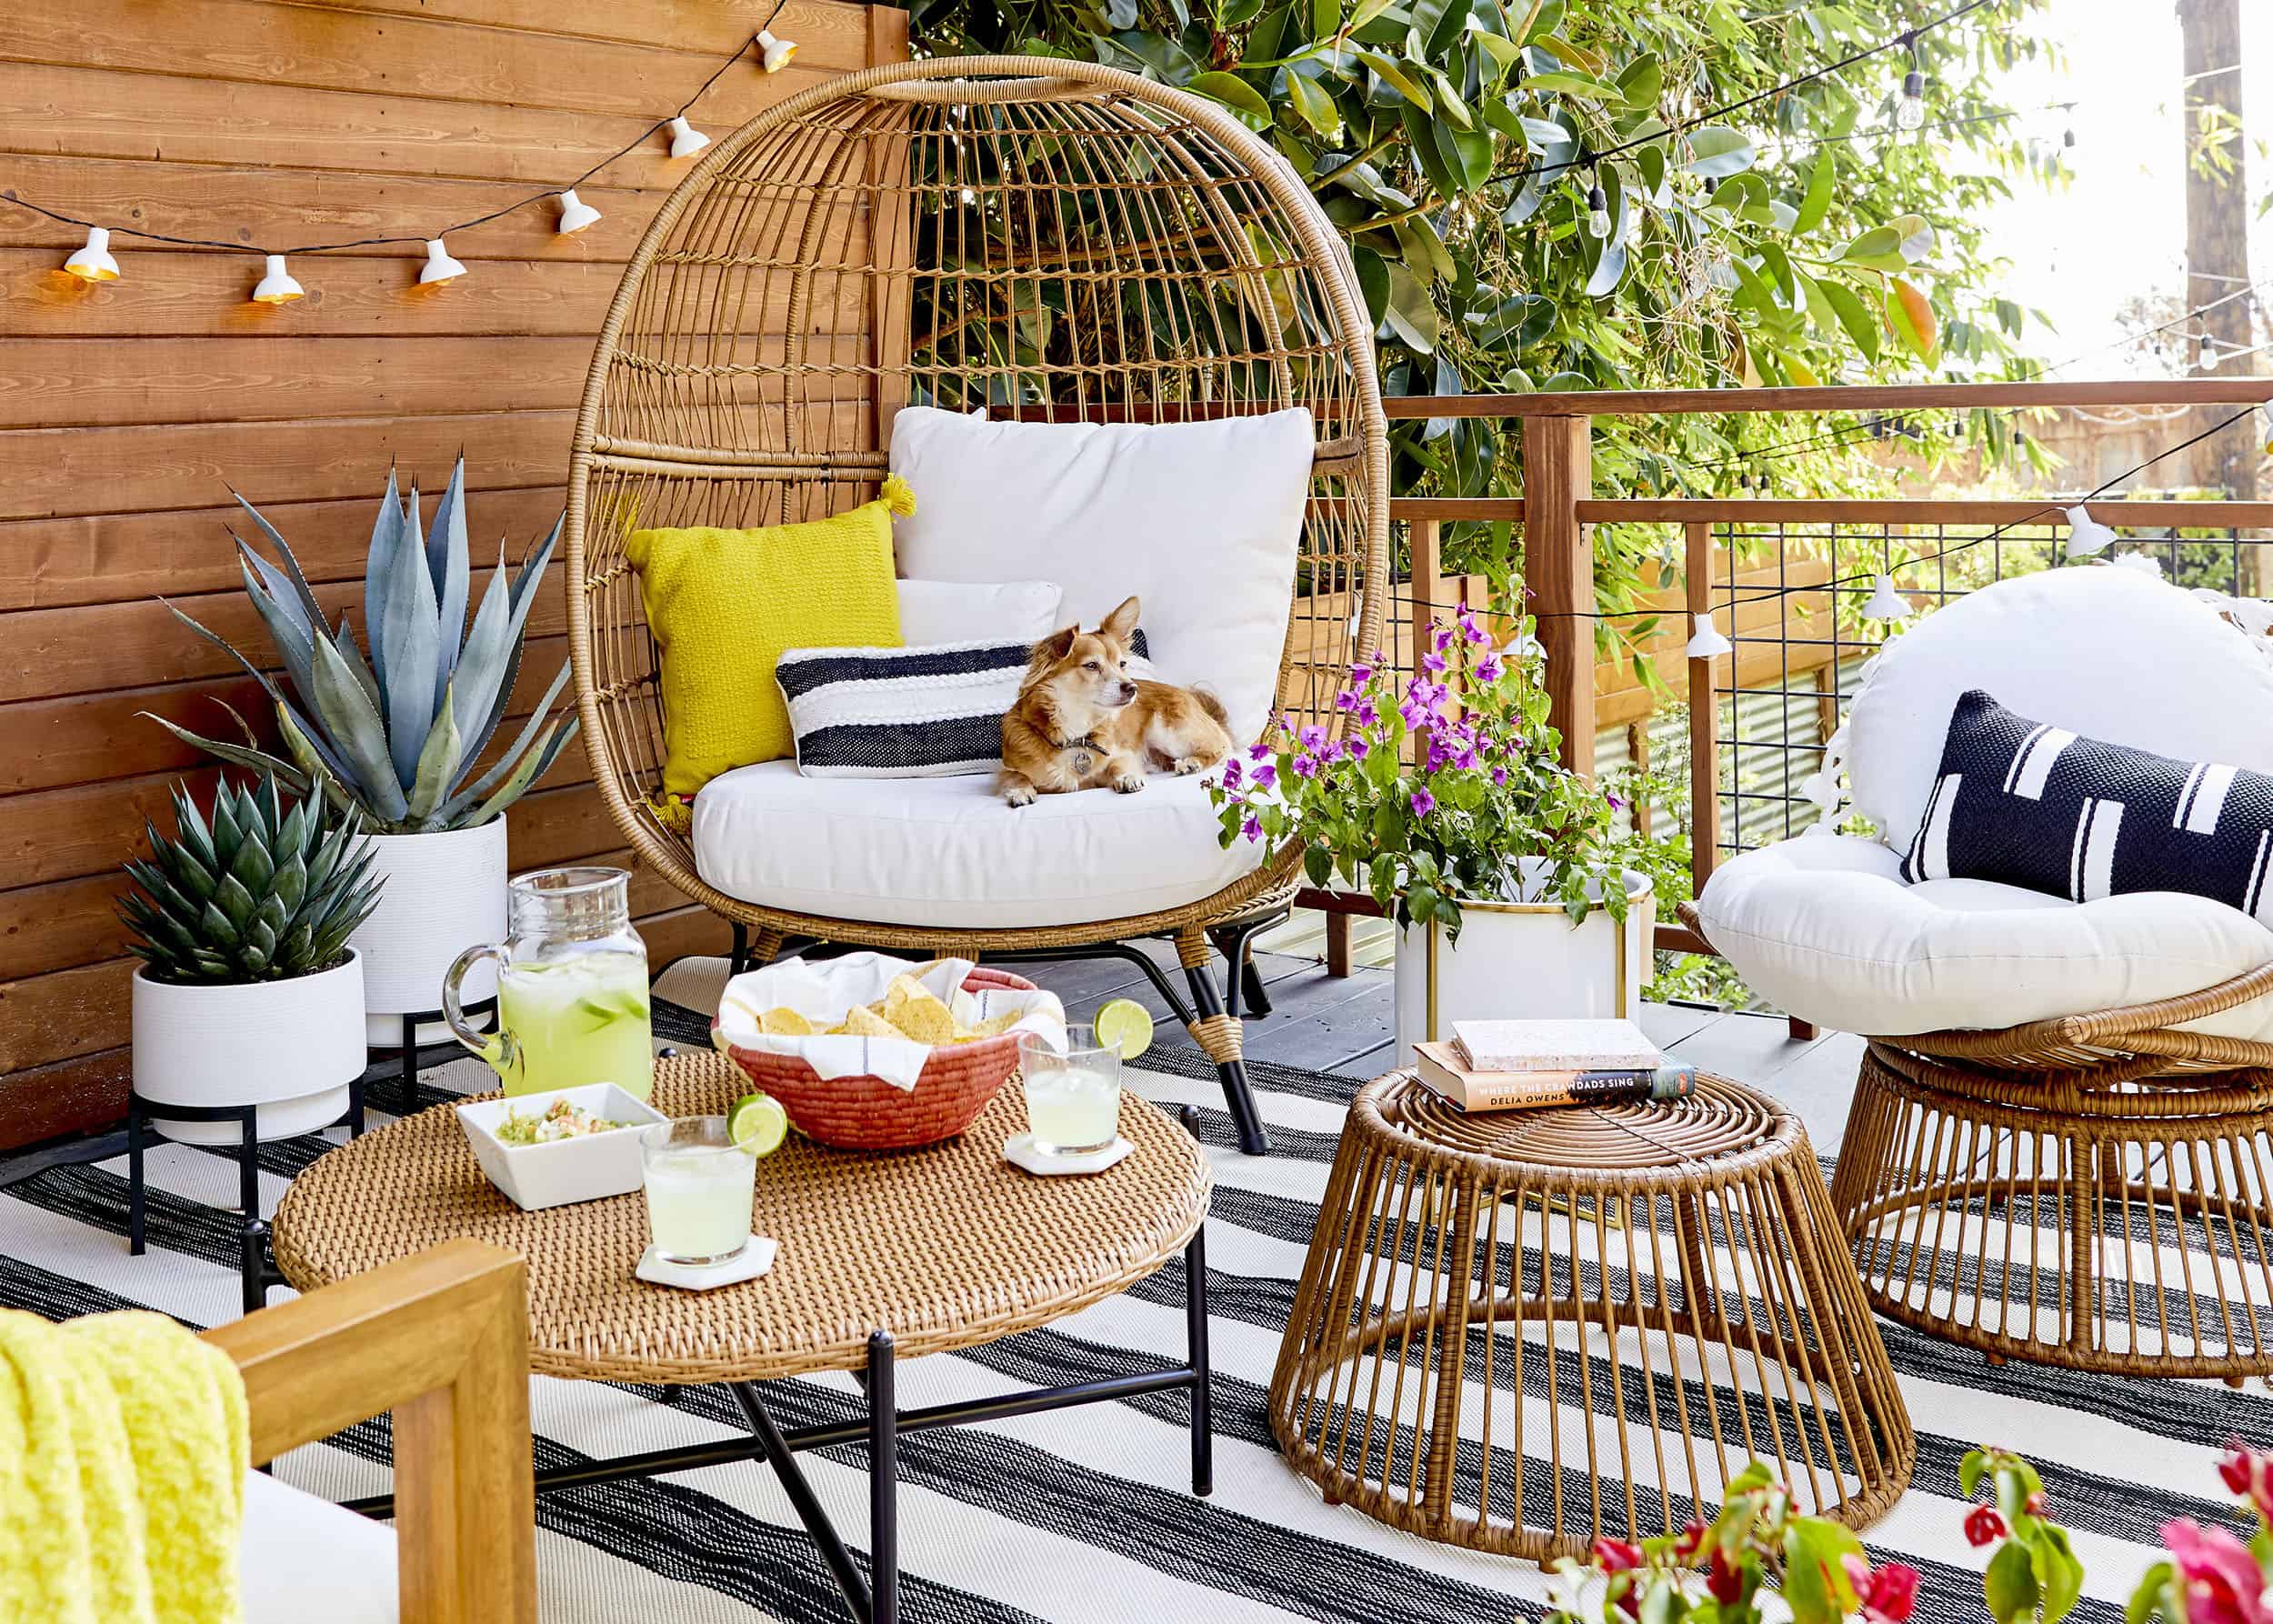 outdoor patio with wooden baskets for seating, basket chair with corgi seated on it and brightly colored decorations